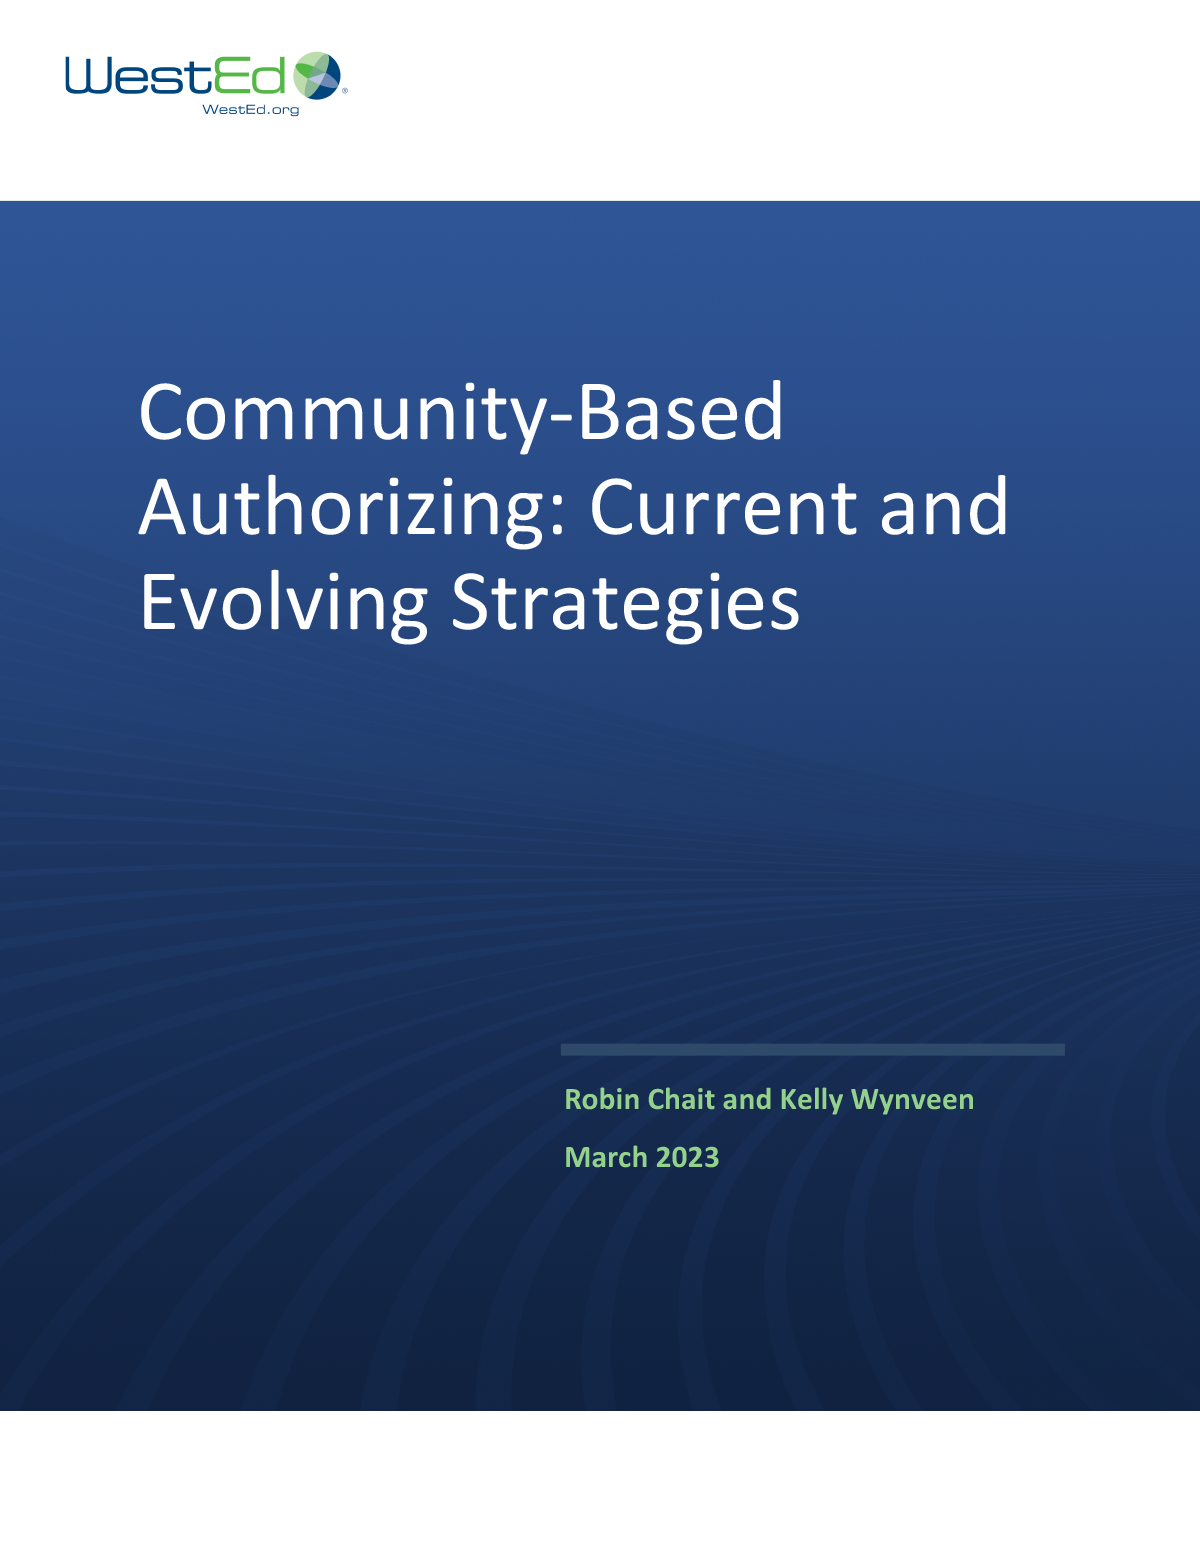 Community-Based Authorizing: Current and Evolving Strategies